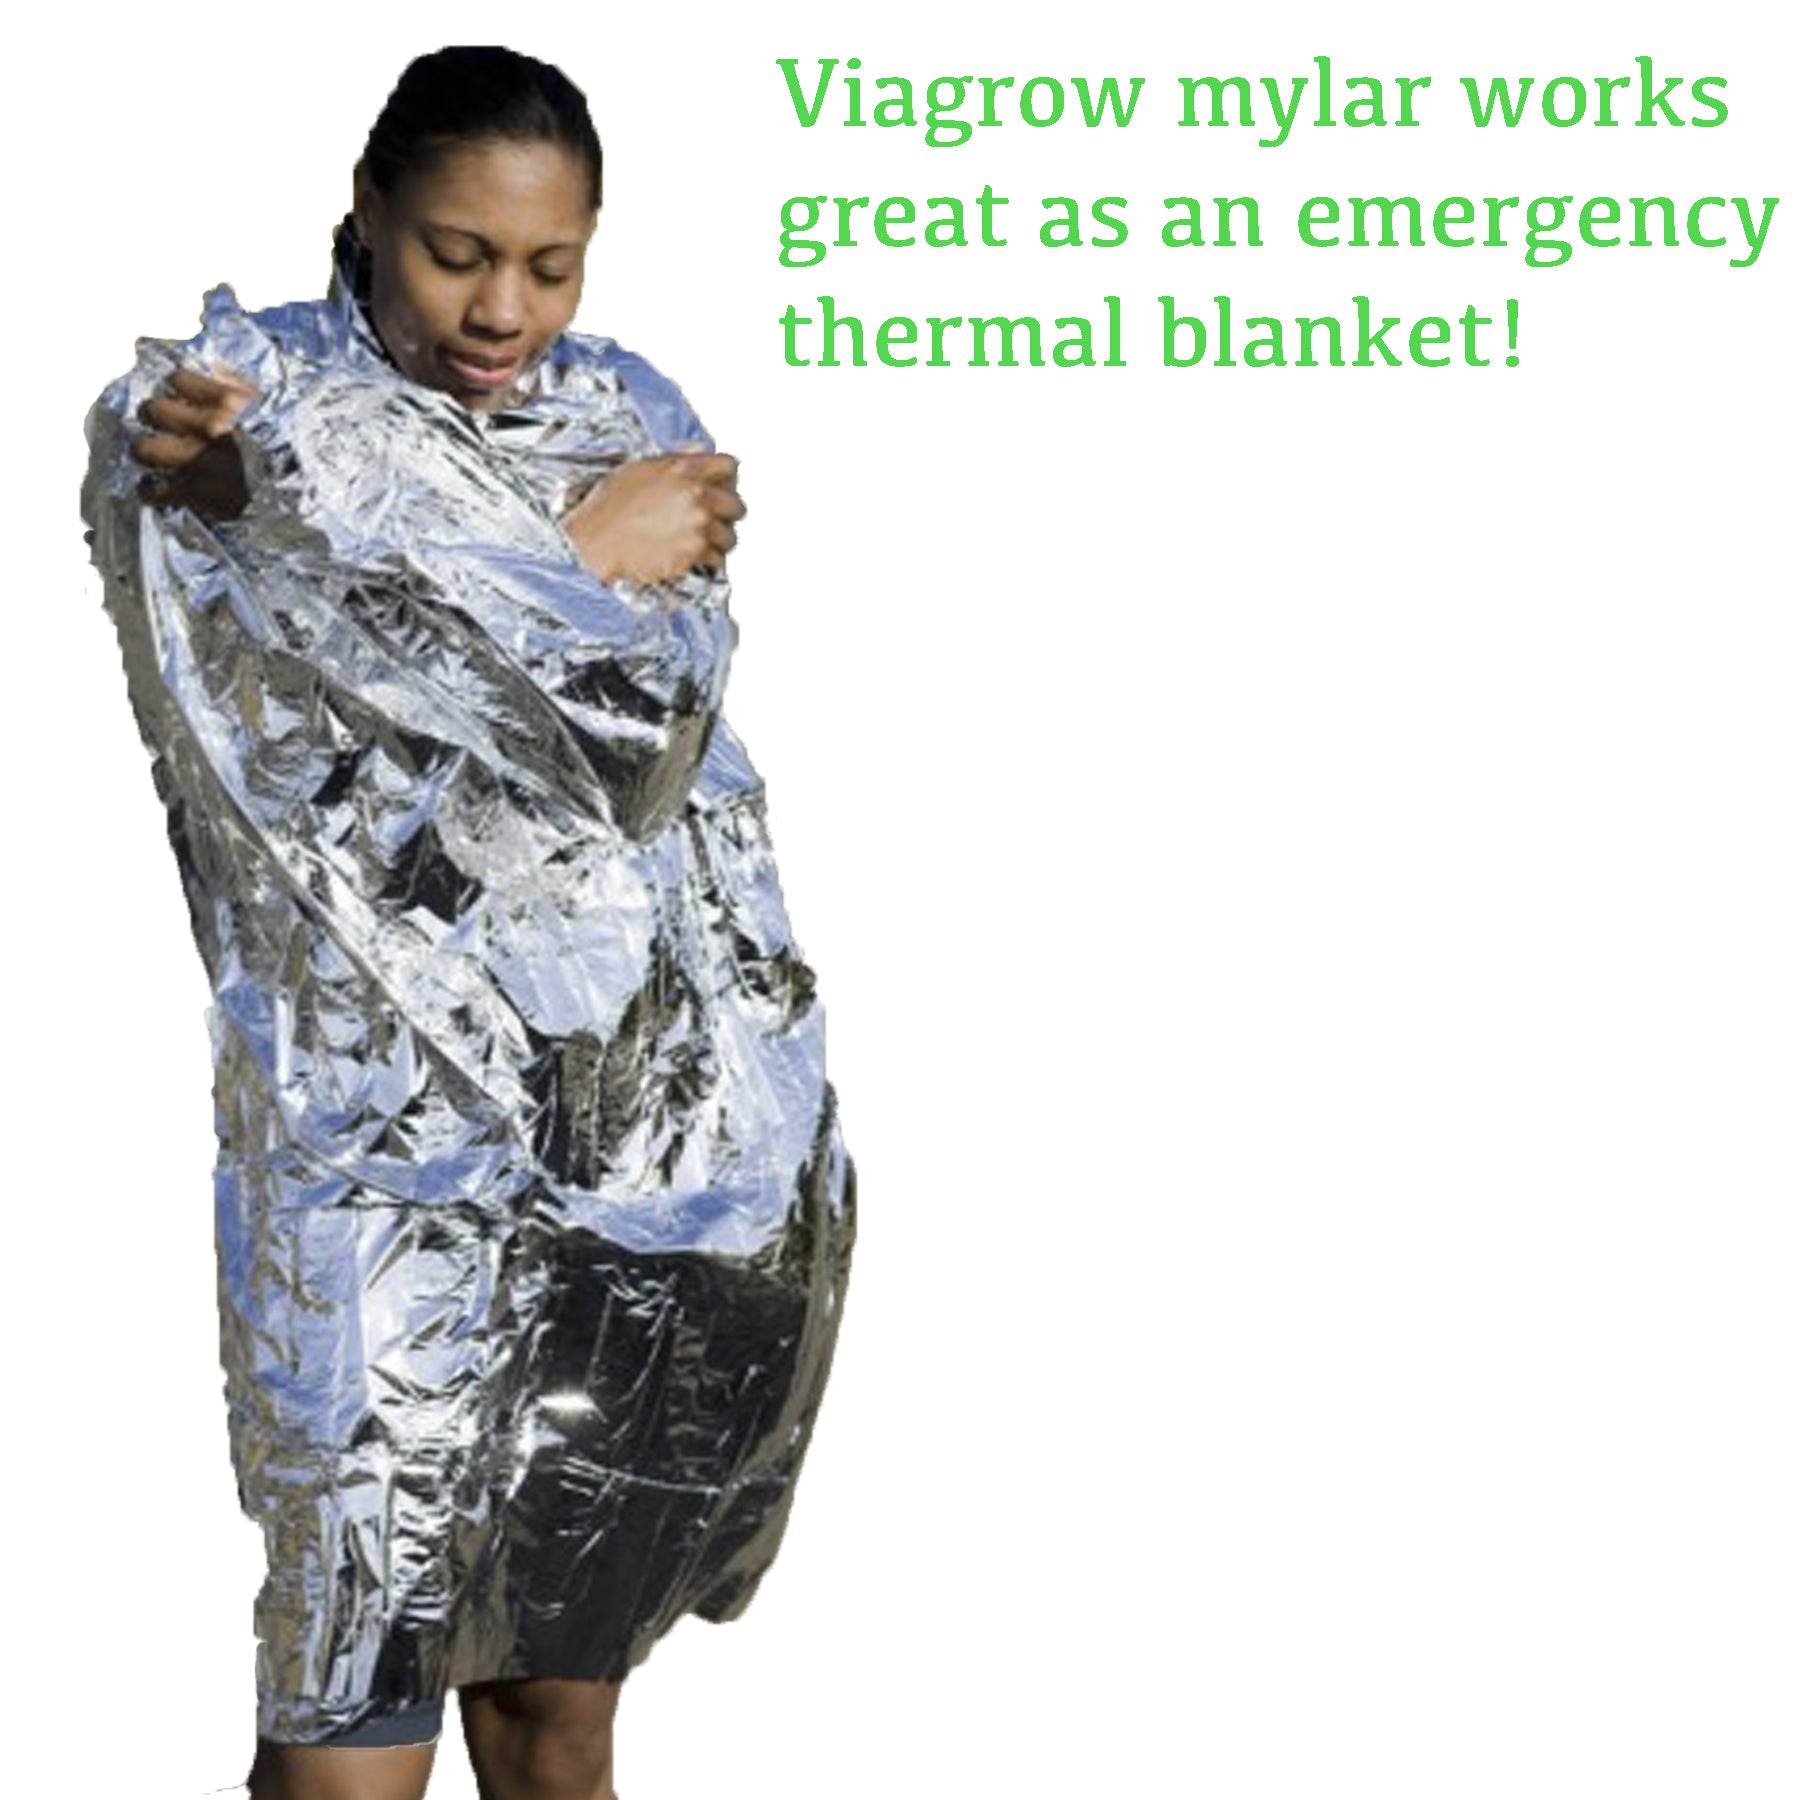 Viagrow Mylar Reflective Material, 50 feet, White/Silver (Case of 6)